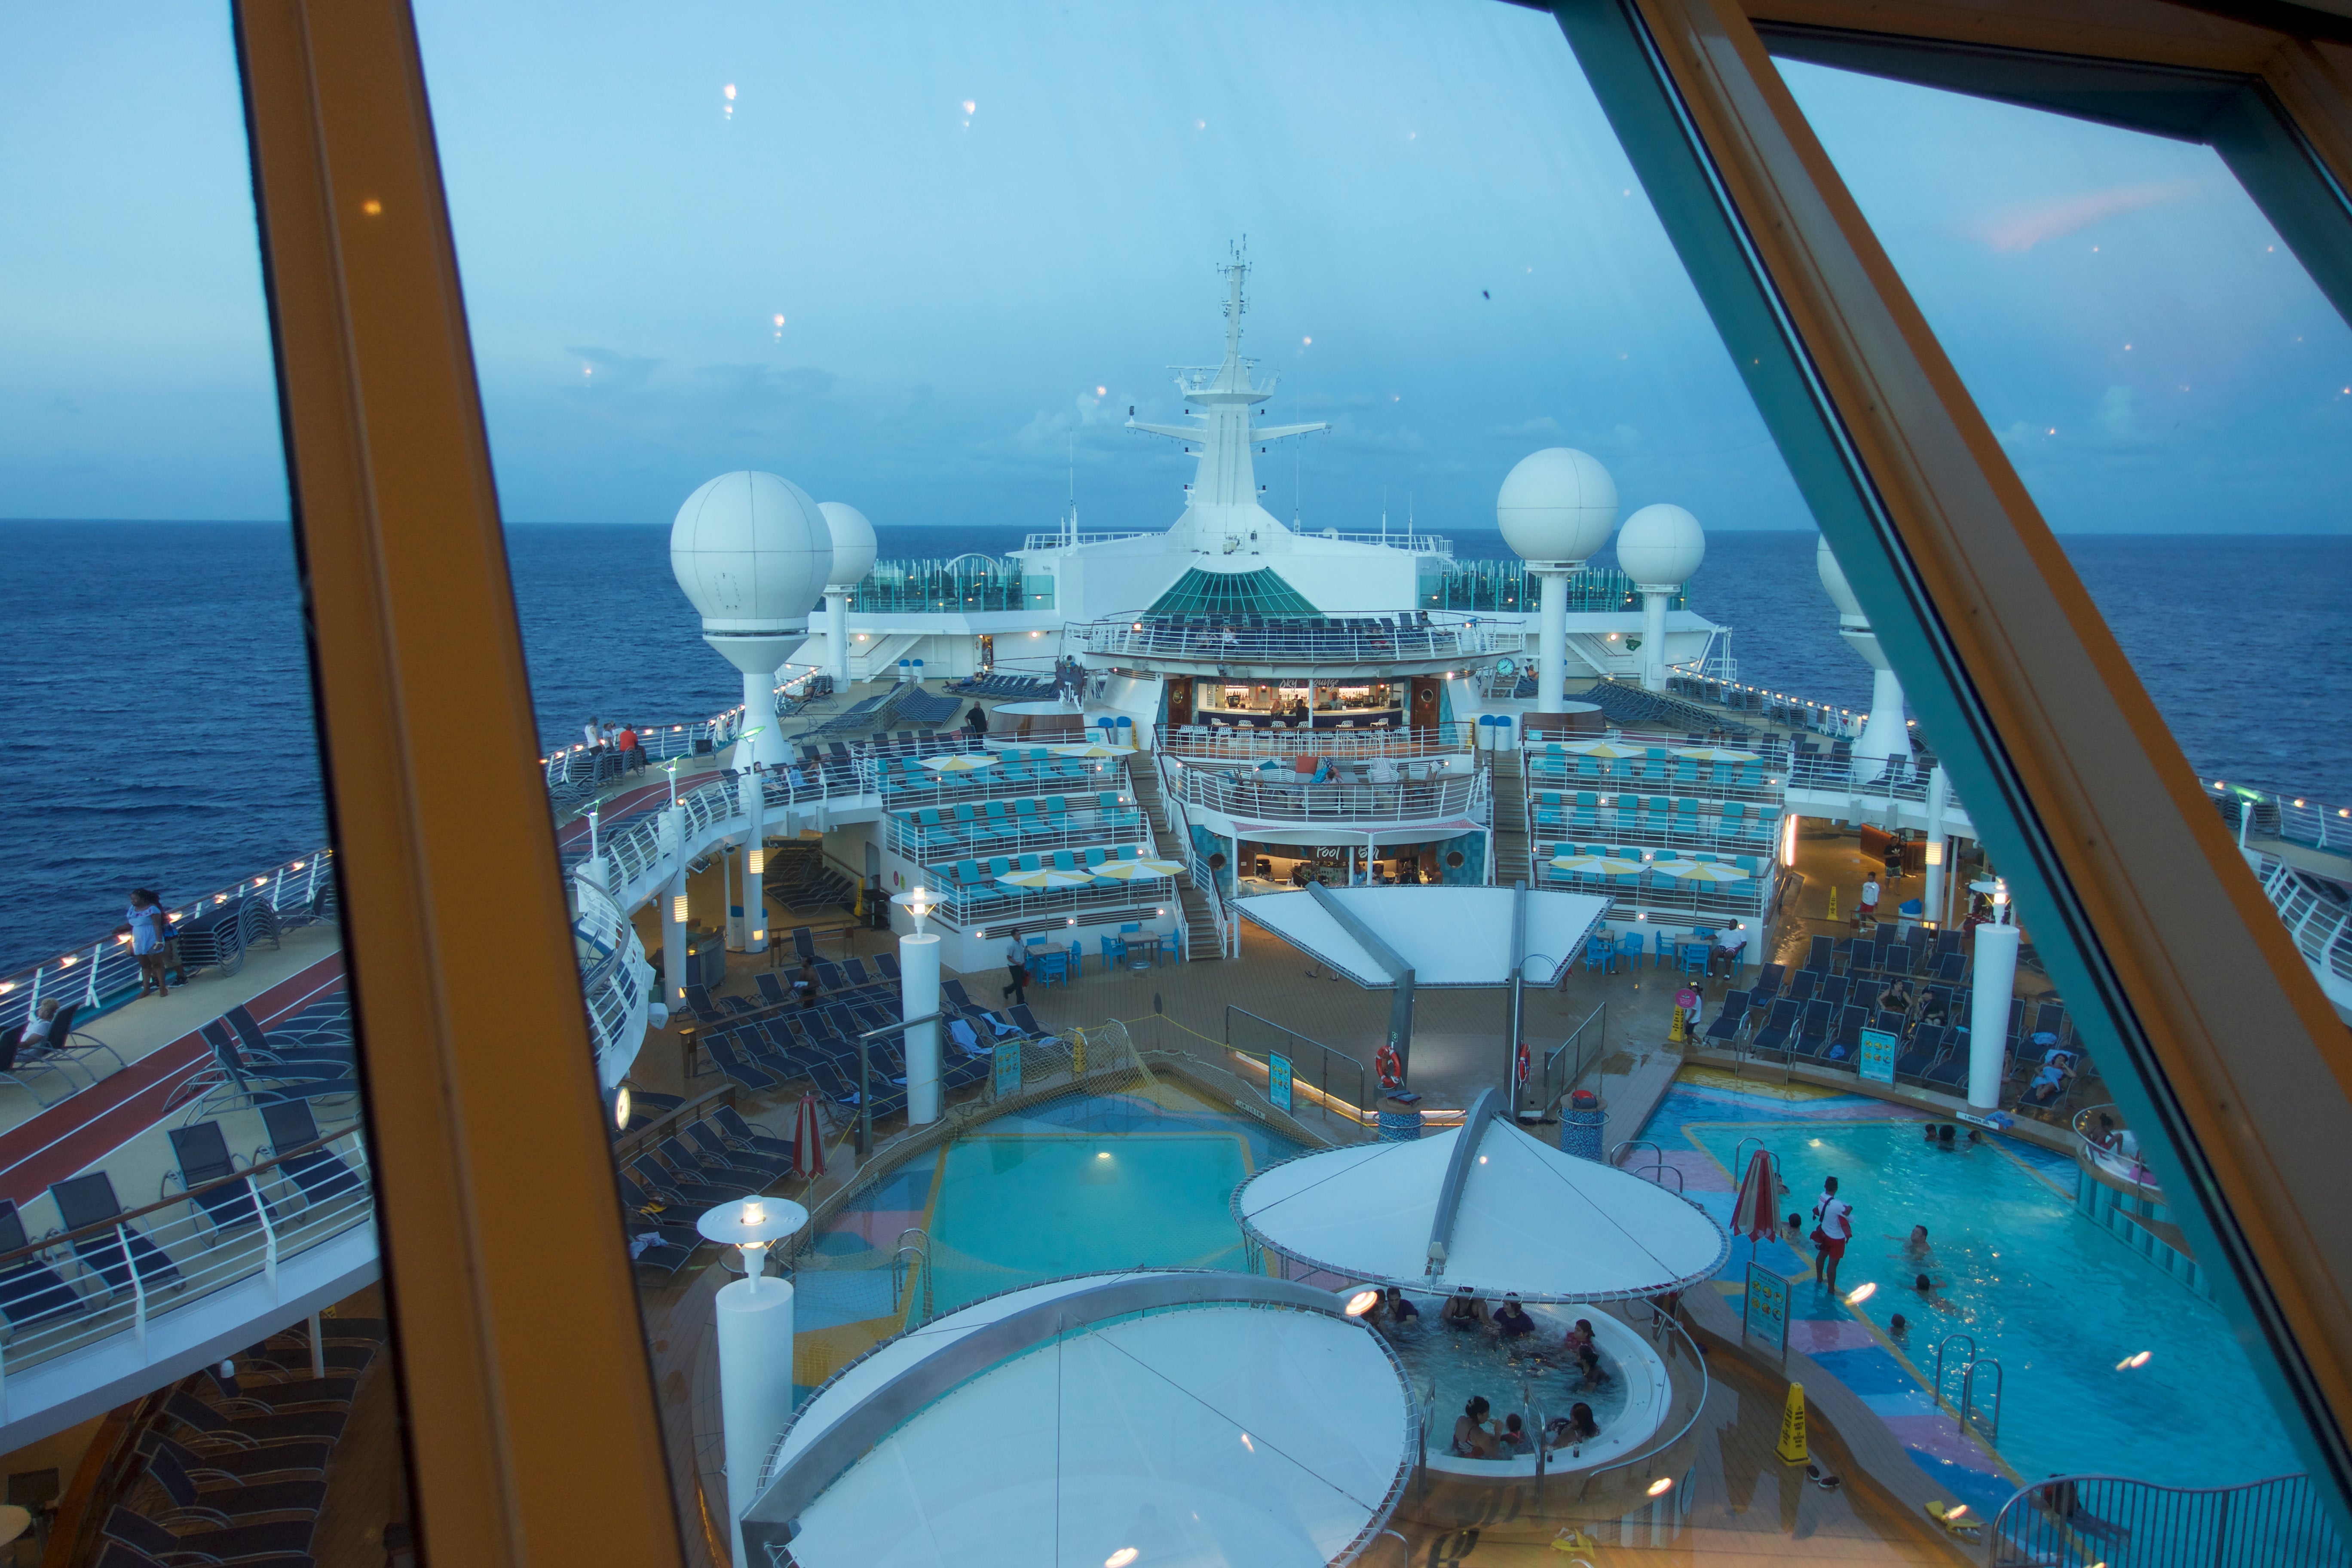 CRUISE SHIP REVIEW: Royal Caribbean's Mariner of the Seas - The Winglet